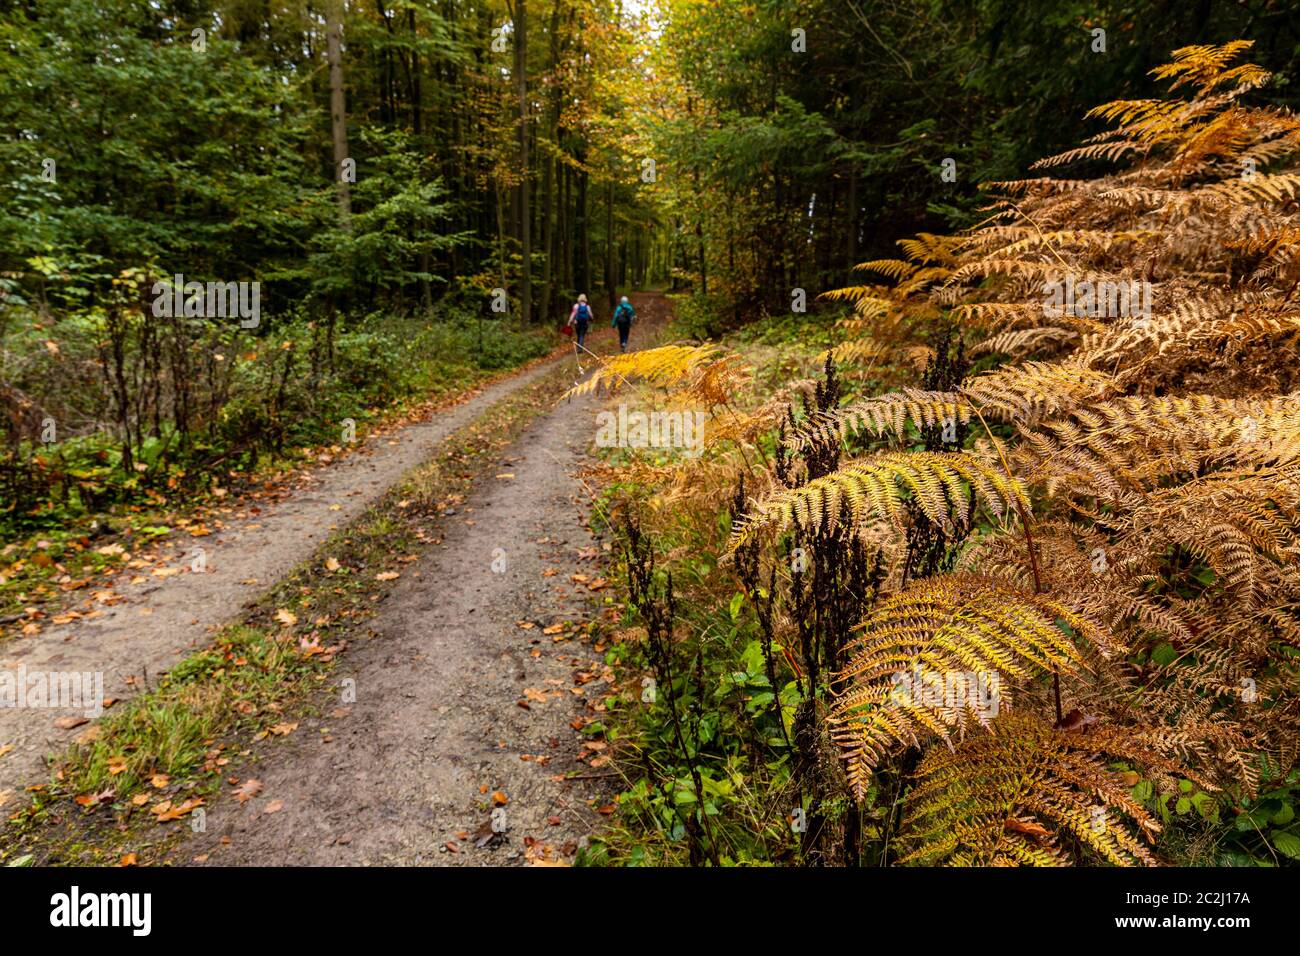 A walk and hike in the autumn forest Stock Photo